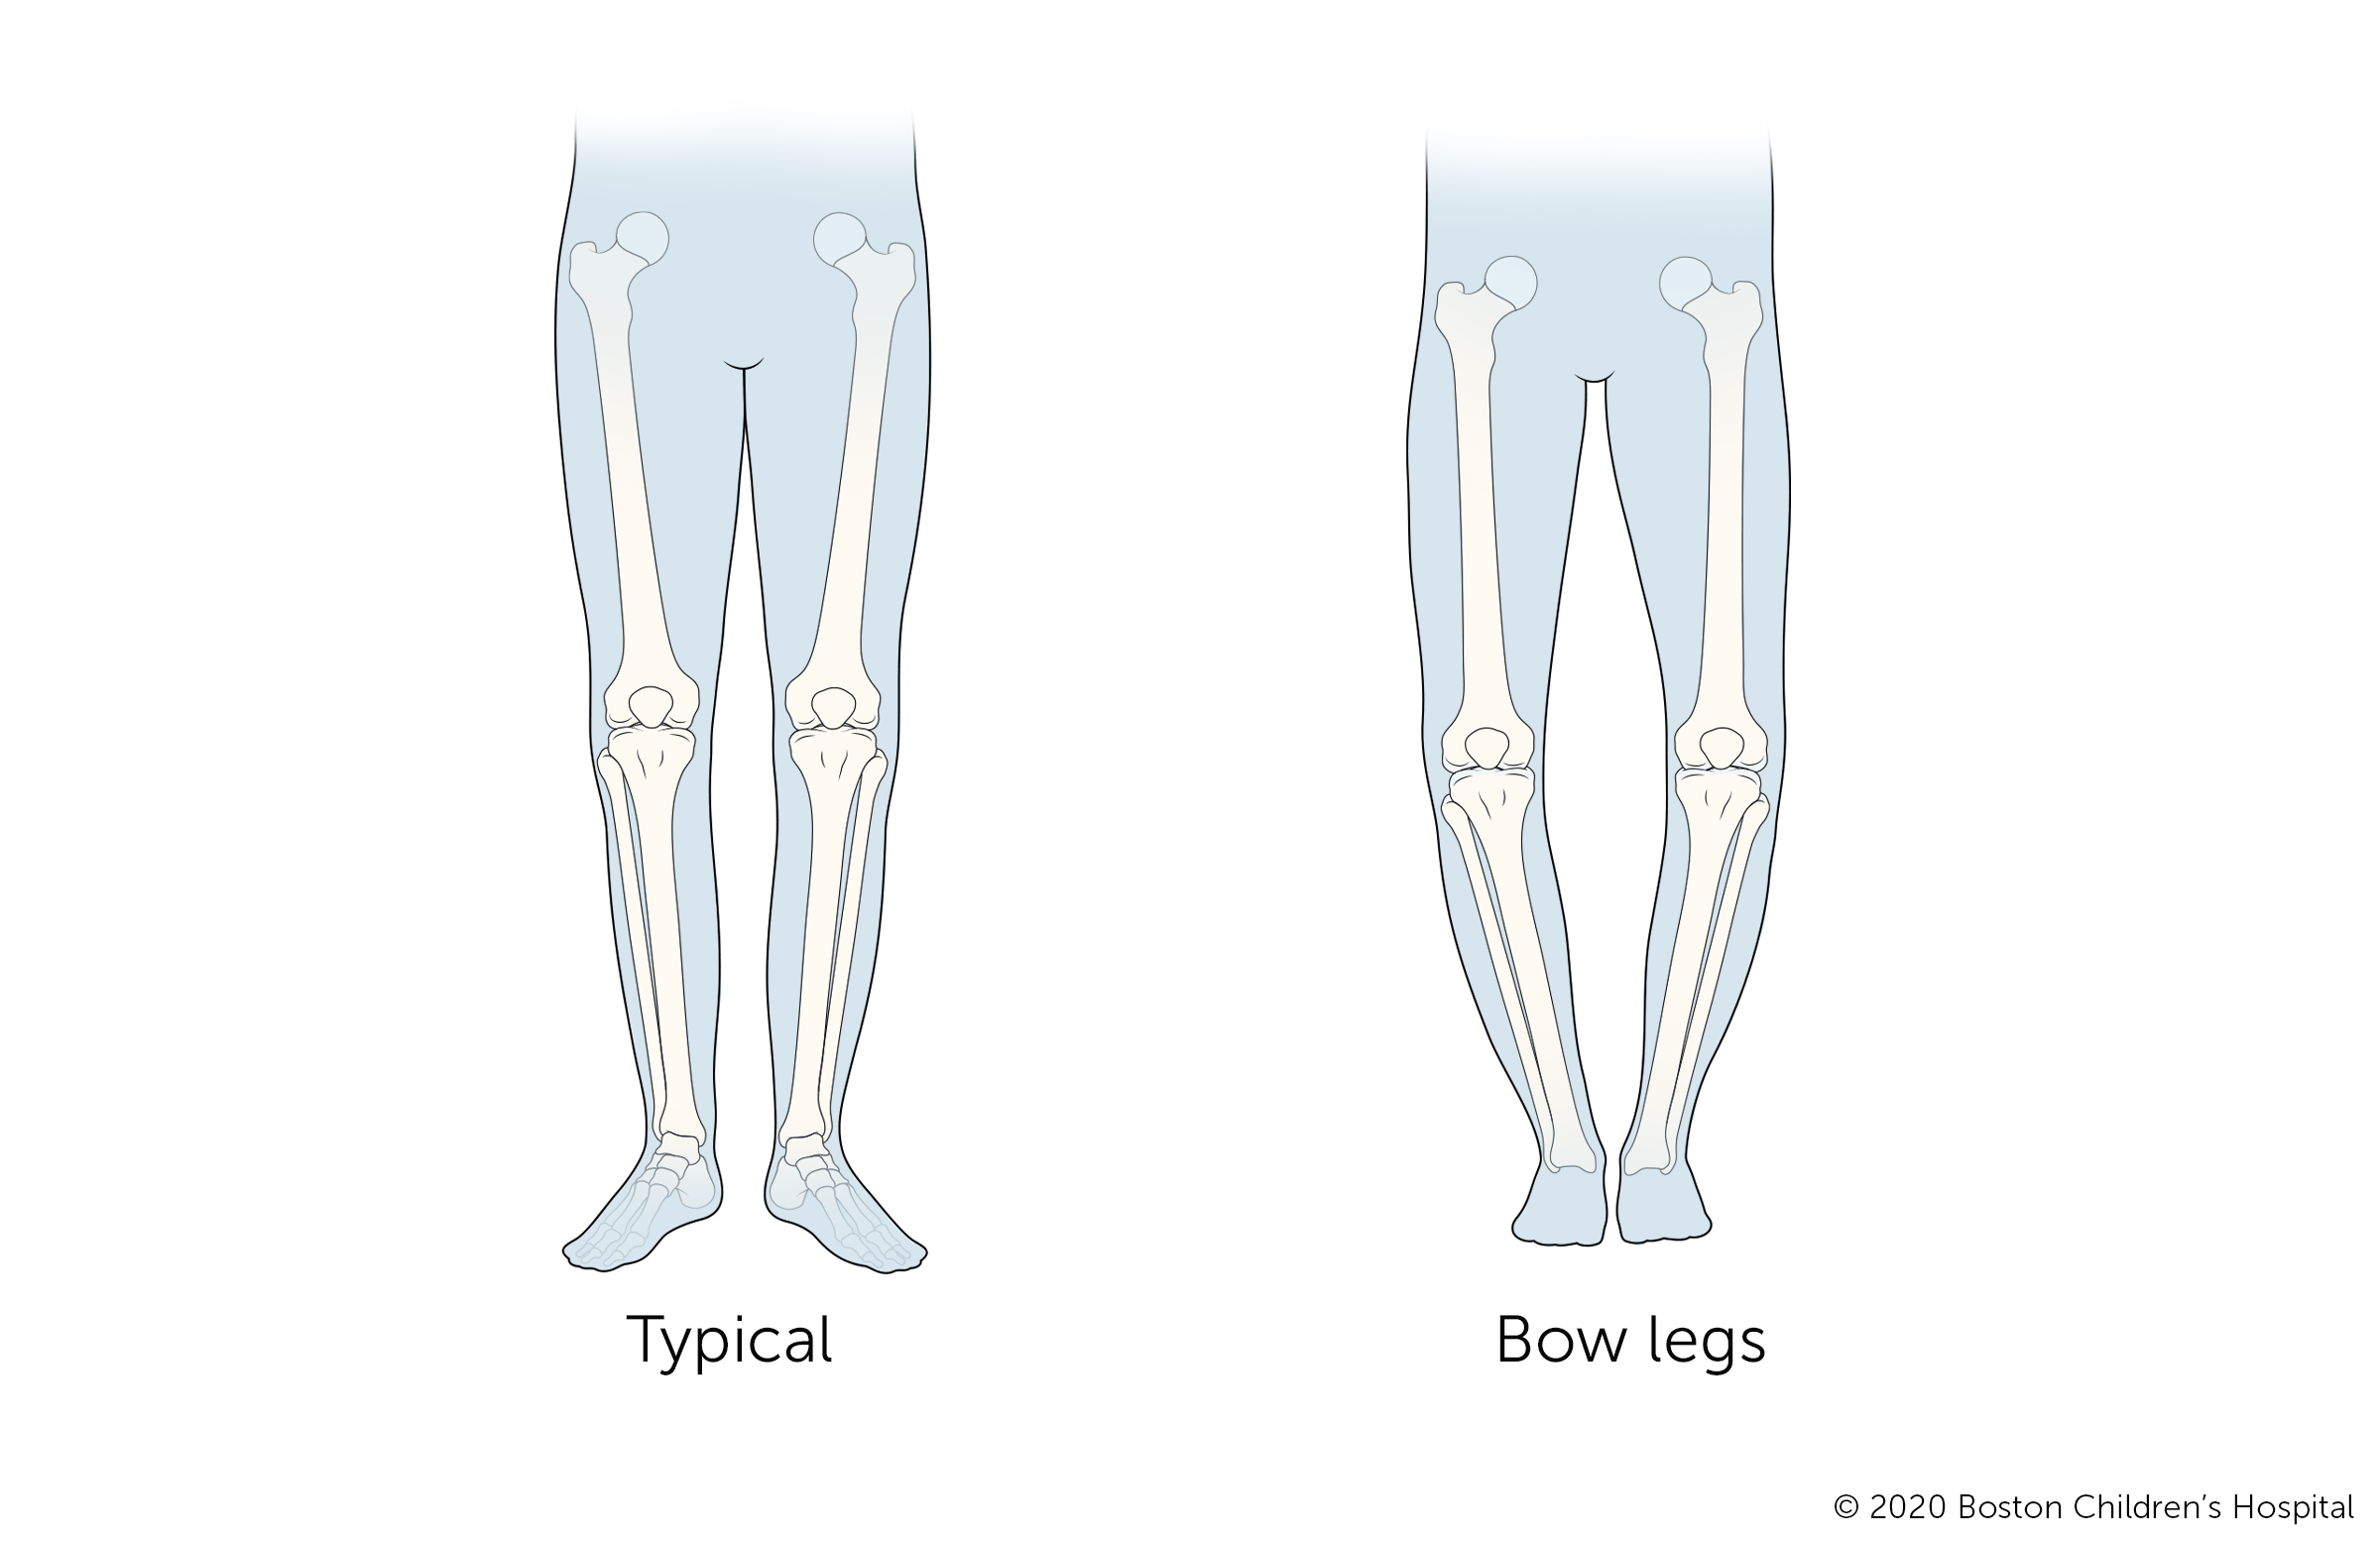 On the left is a child with typical development. On the right is a child who has bow legs.